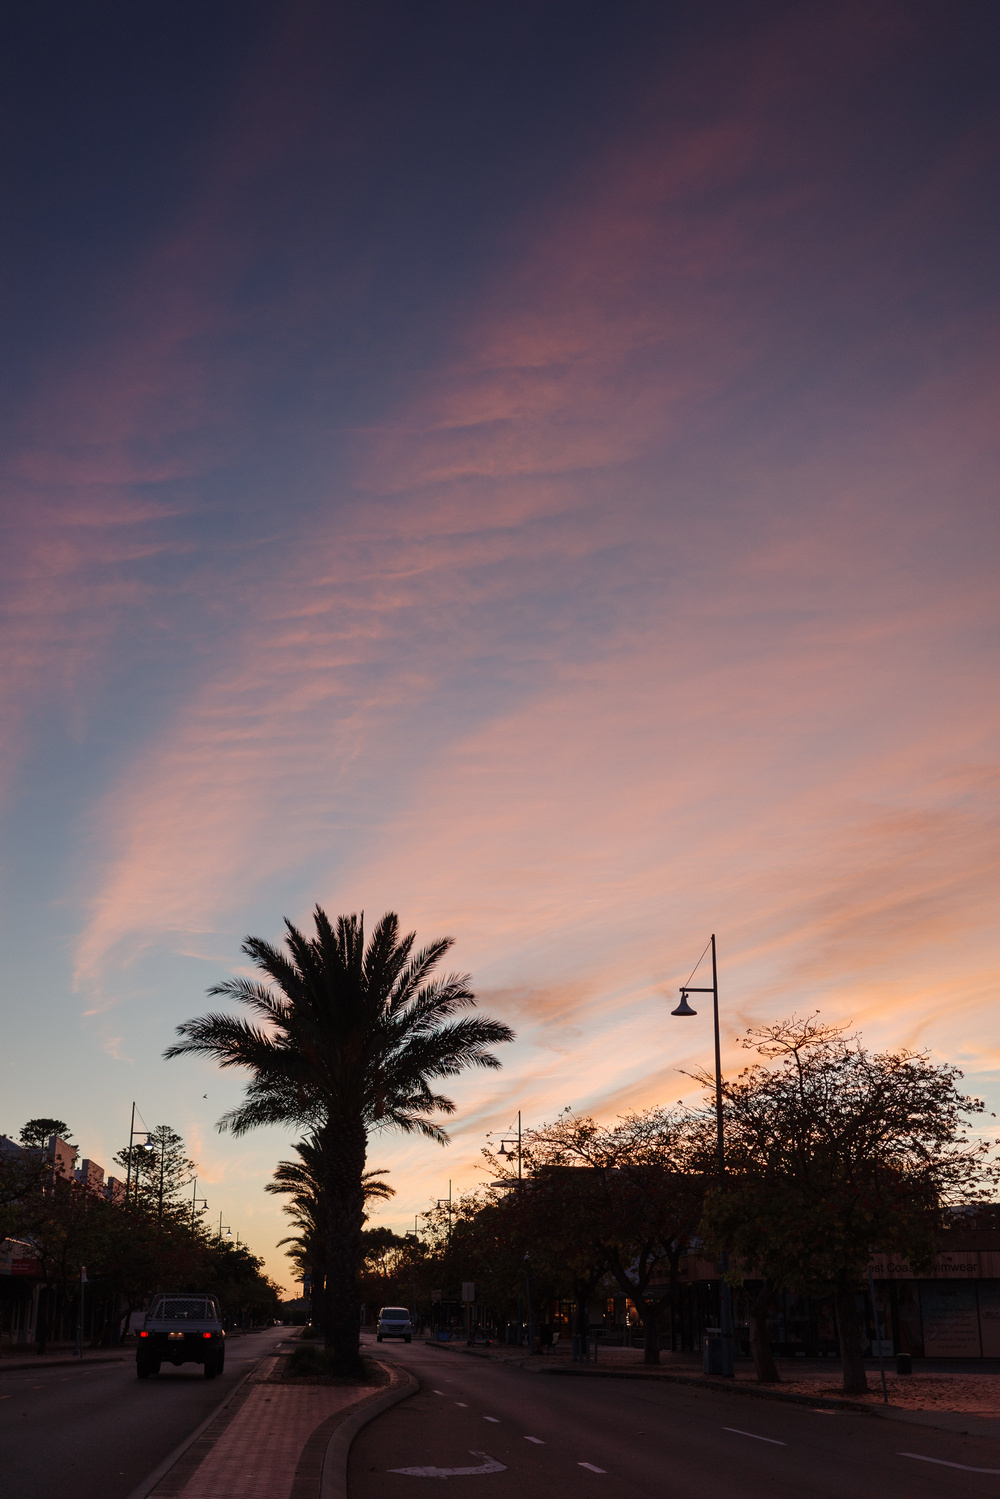 Auto-generated description: A serene road is illuminated by a picturesque sunset sky, featuring a prominent palm tree in the center and streetlights on either side.